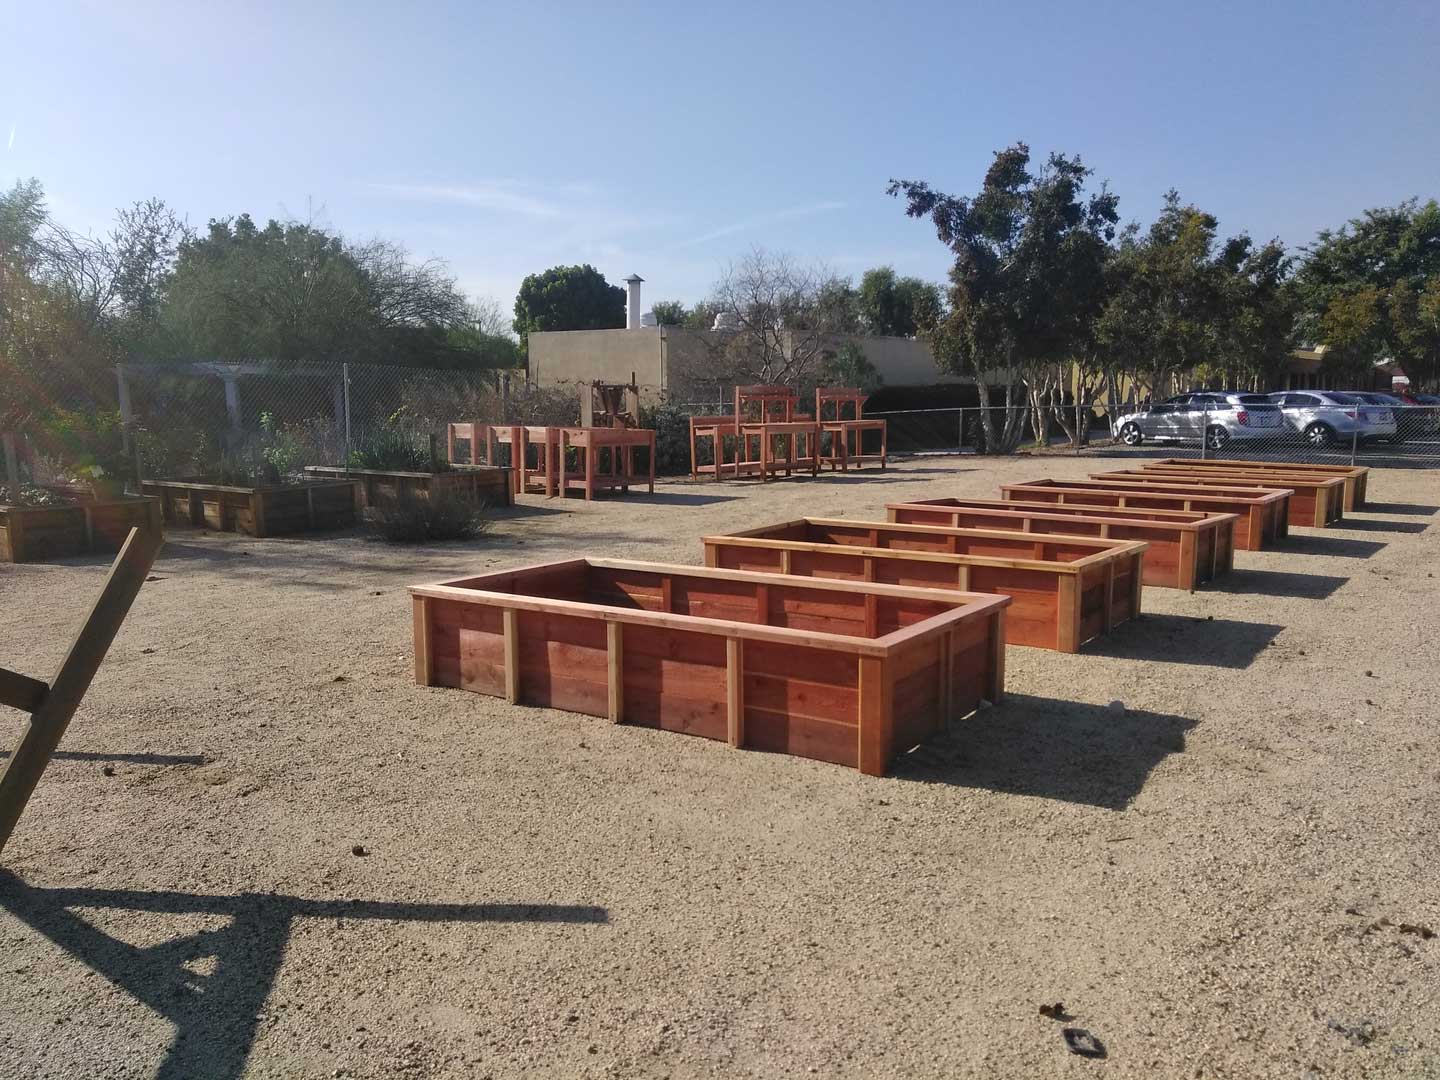 A group of wooden raised beds in a dirt lot.